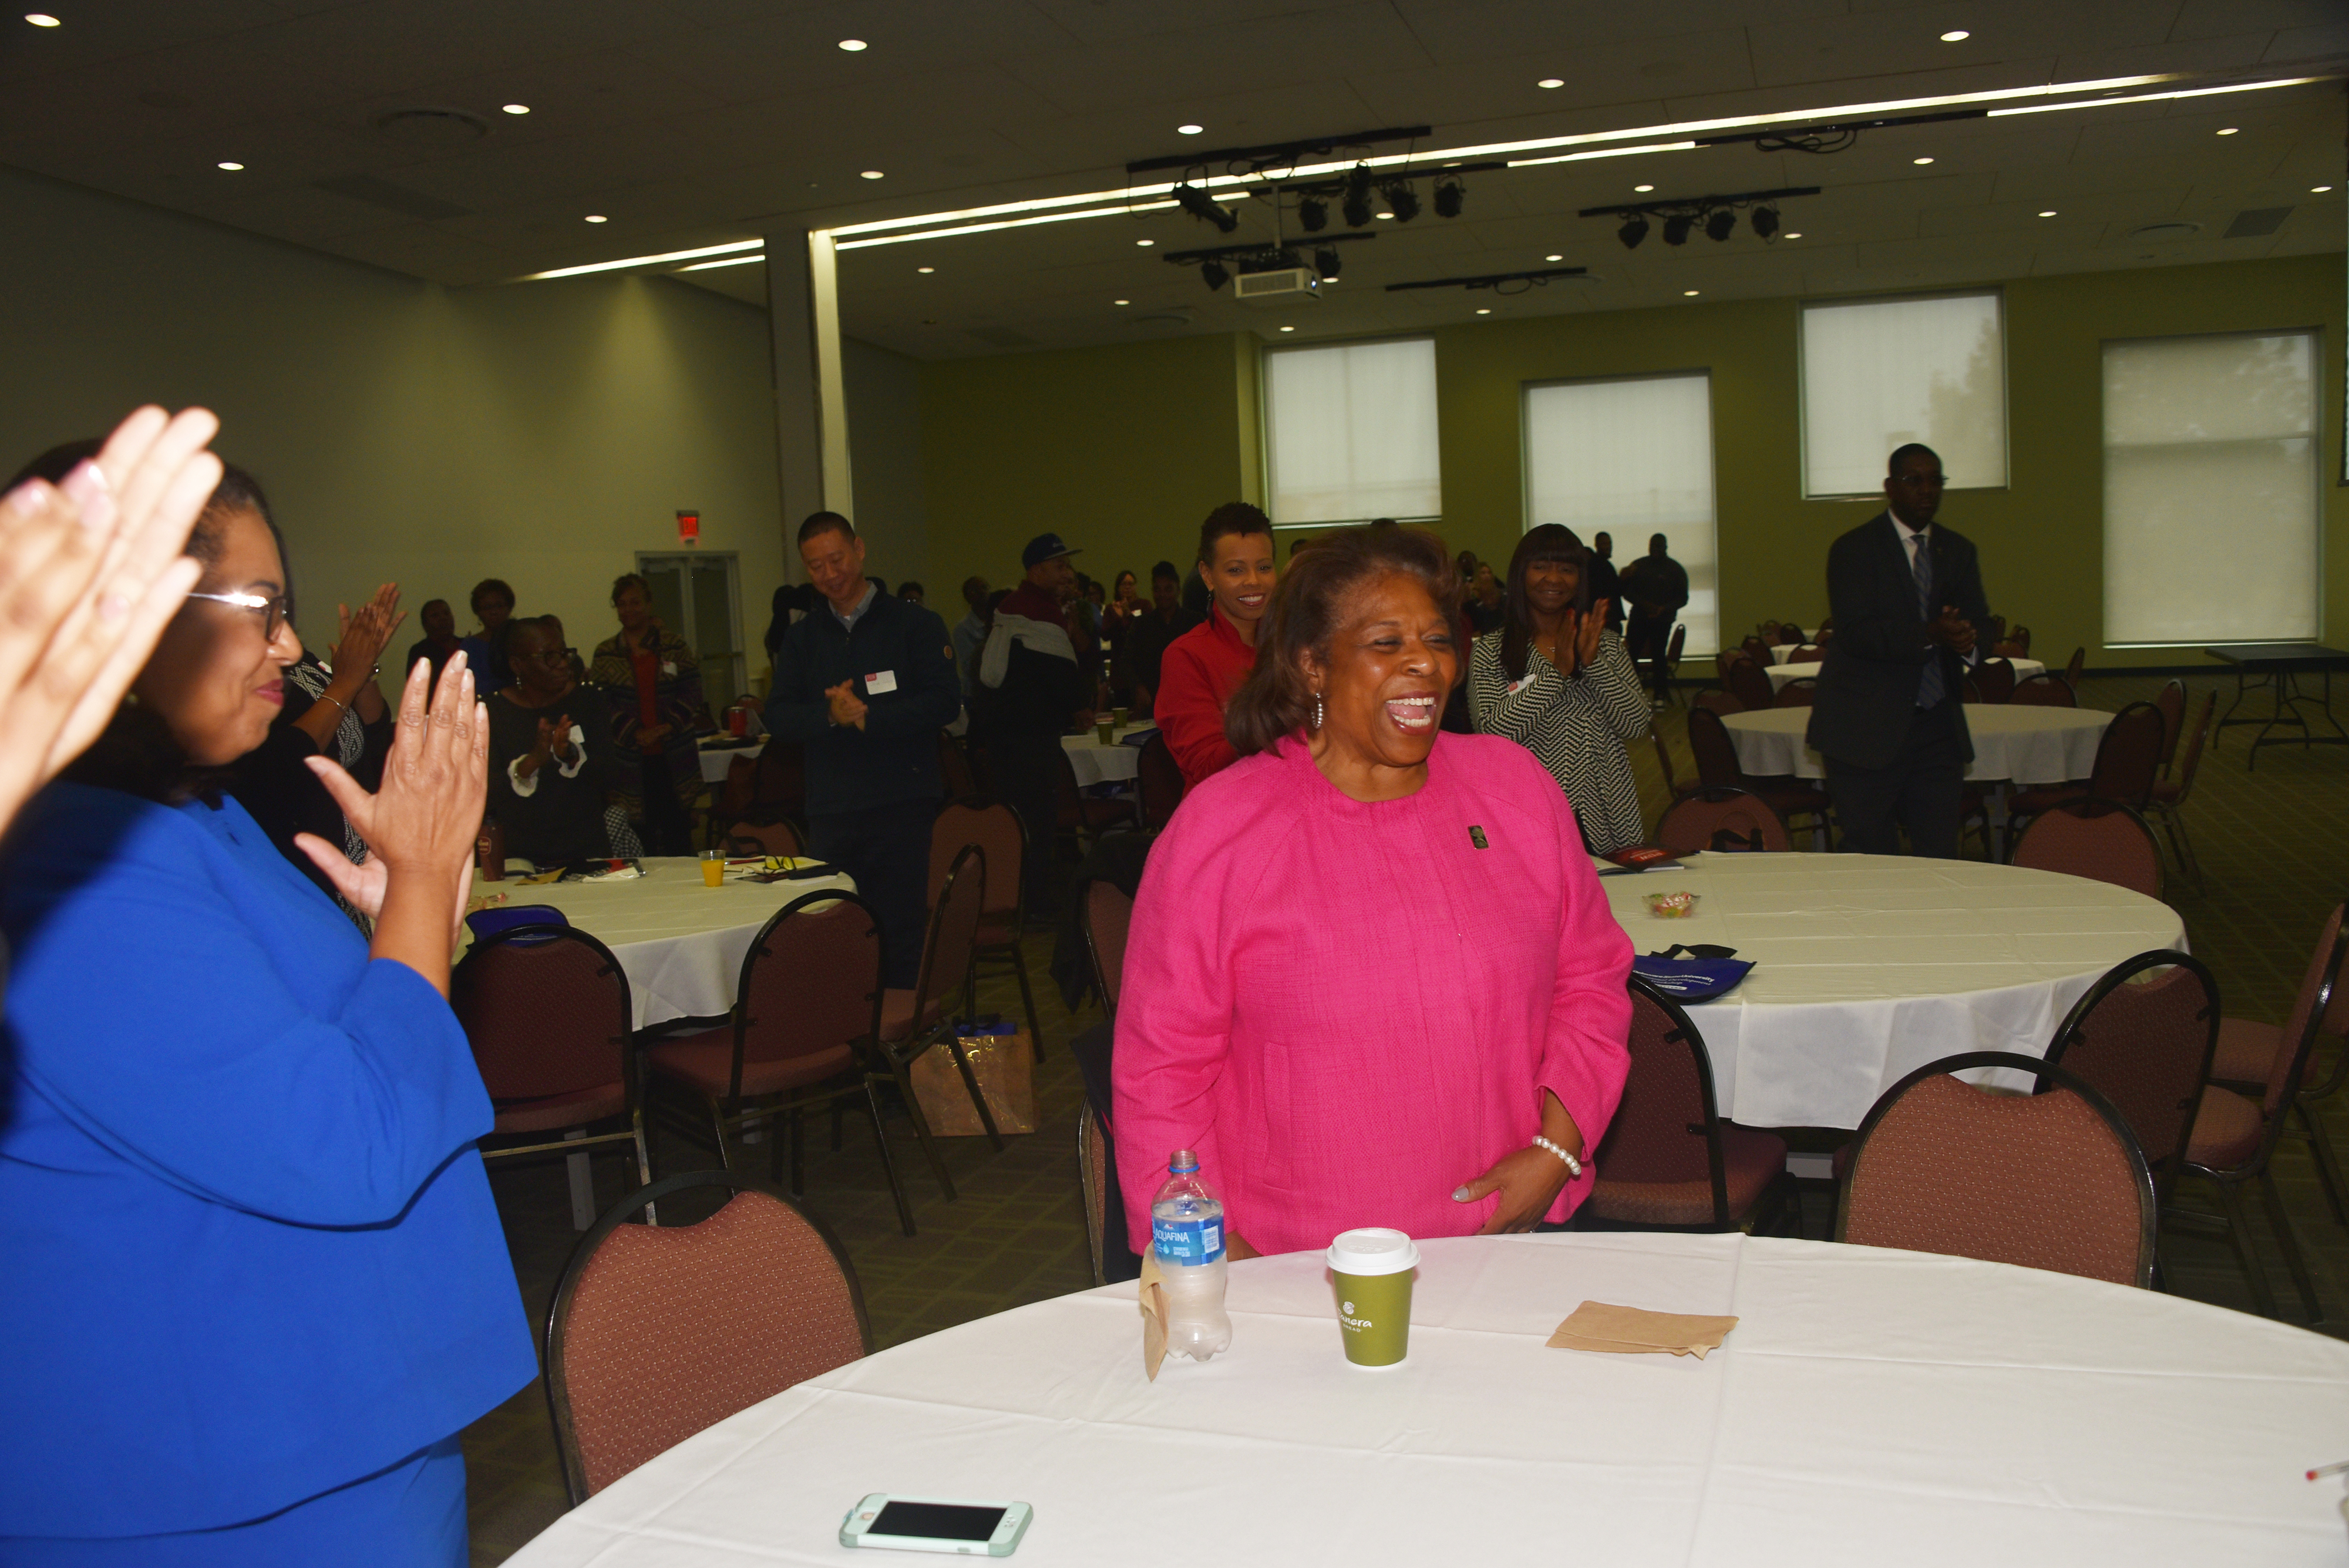 Following University President Wilma Mishoe's remarks at the Oct. 30 Professional Development Workshop, the parlor-filled gather gave her a standing ovation in recognition of the leadership she has provided during her tenure. Dr. Mishoe recently announced that she will retire at the end of 2019.